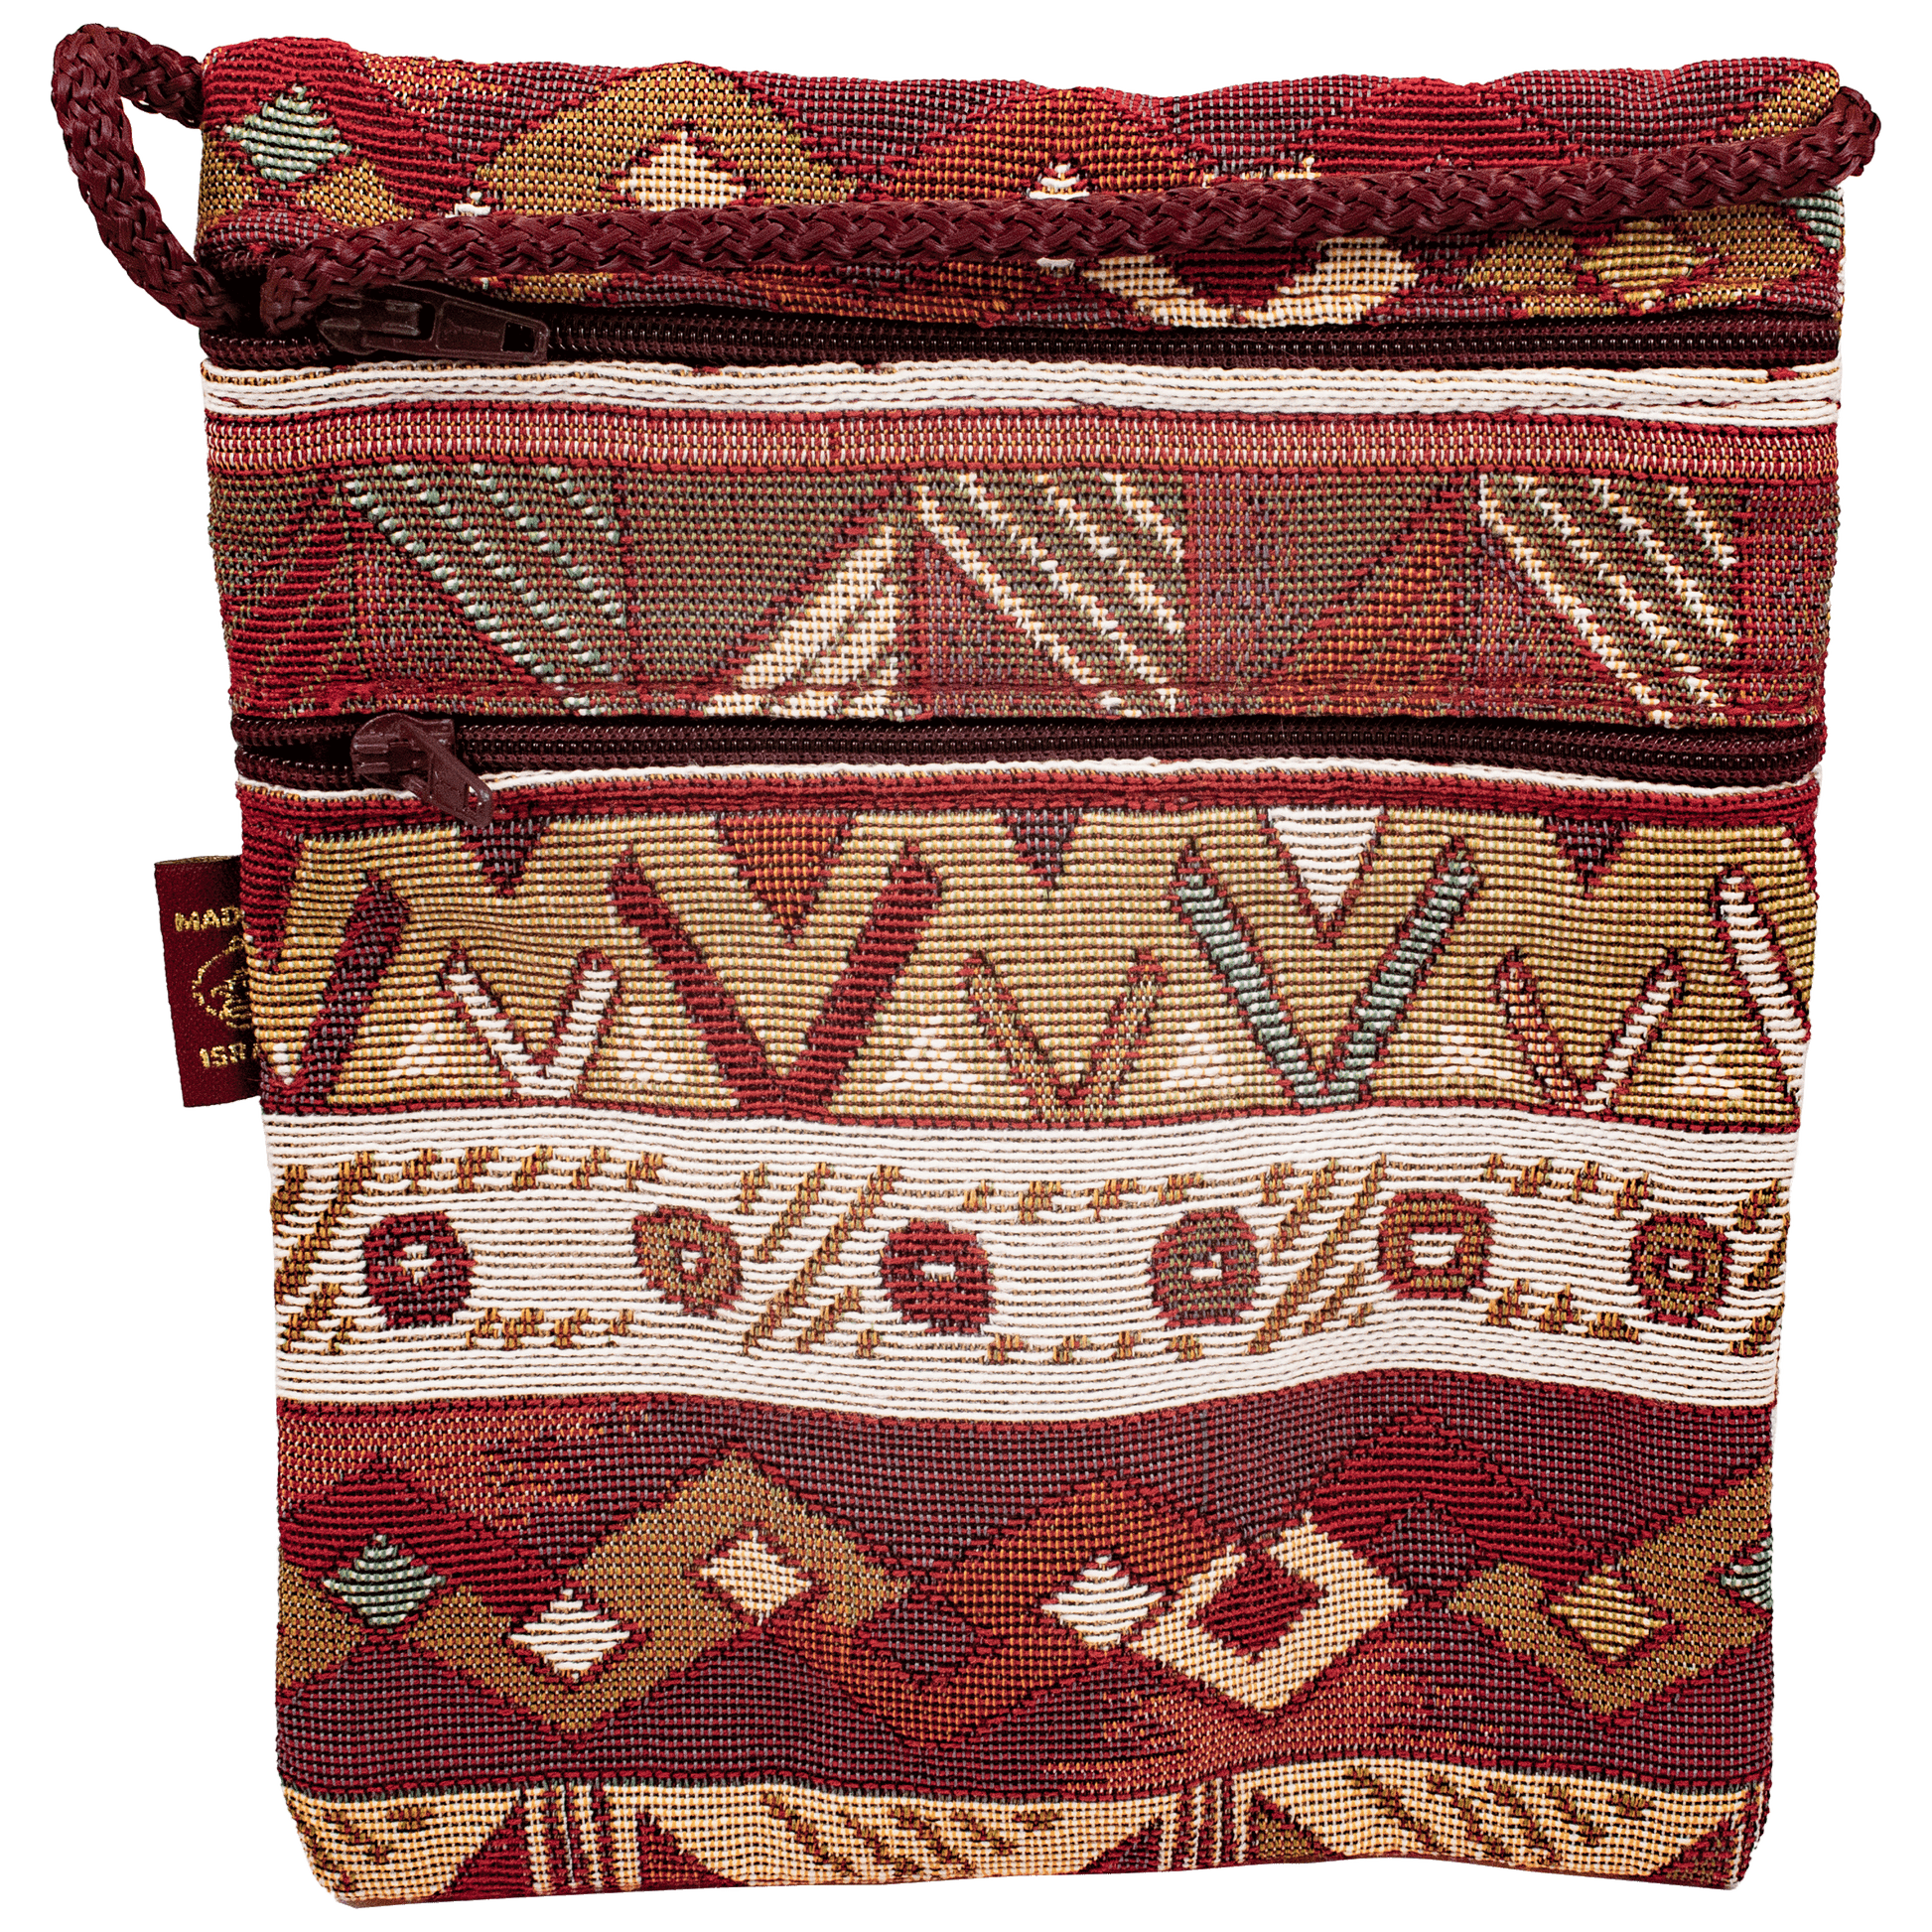 Crossbody Purse with maroon and earthy toned tribal pattern